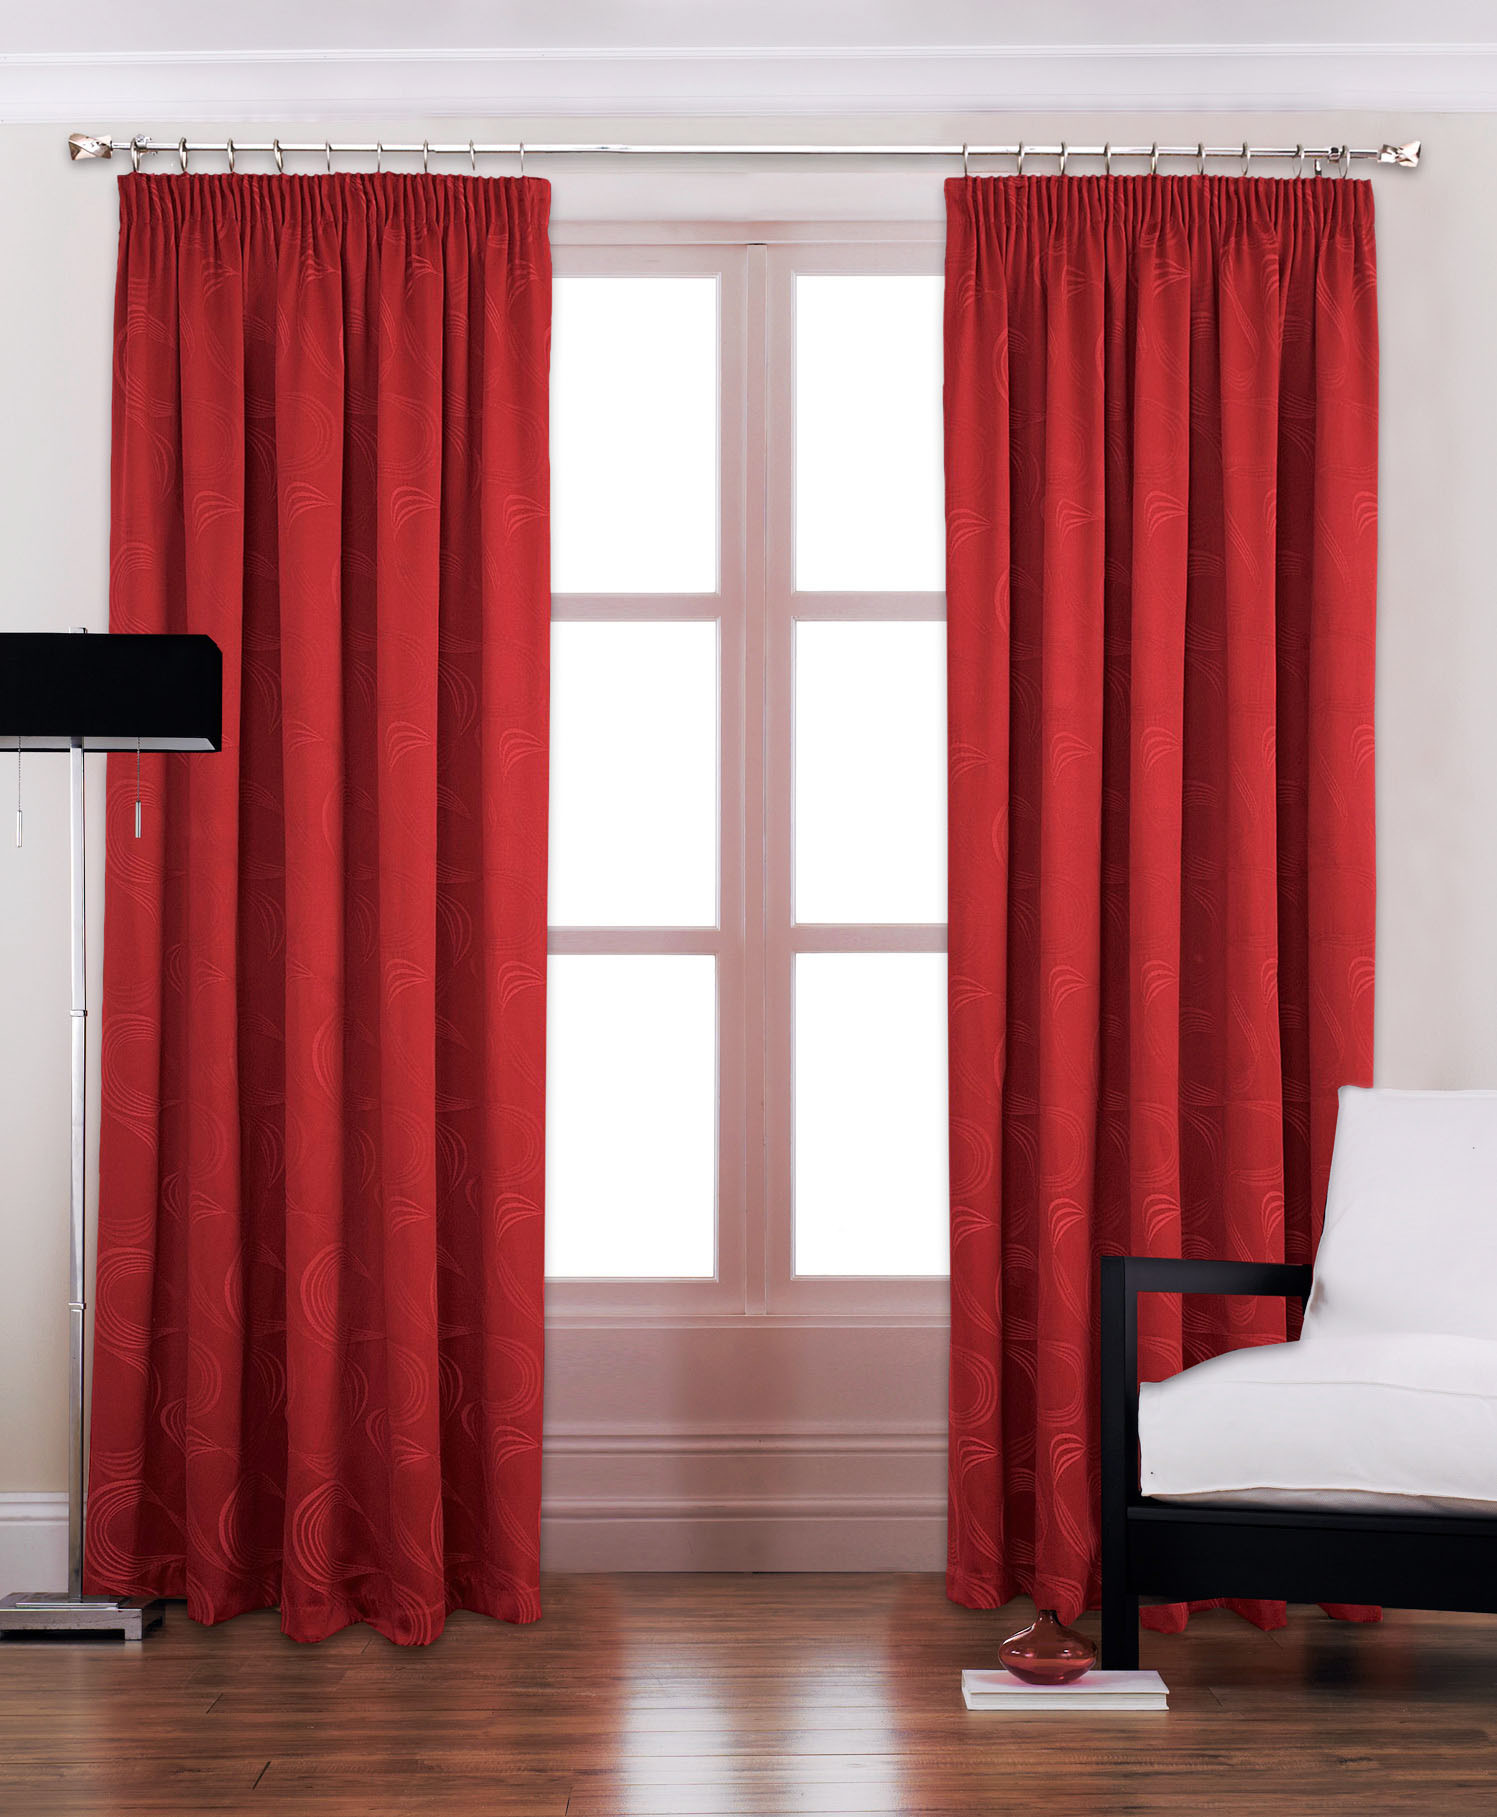 Red Curtains For Living Room
 Why You Should Choose Living Room Curtains Instead of